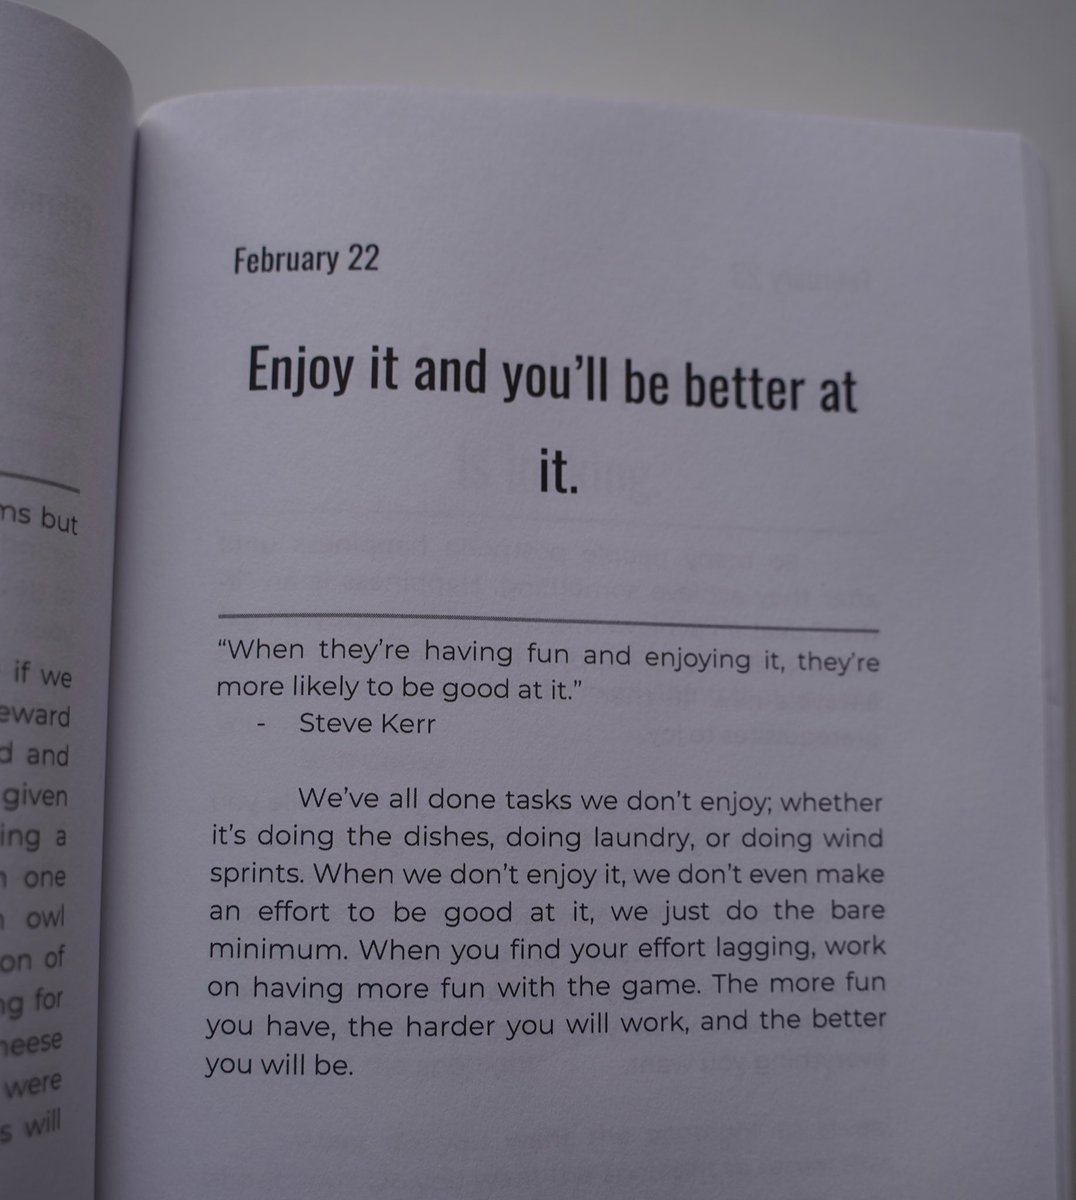 Enjoy it and you’ll be better at it. #DailyWisdom